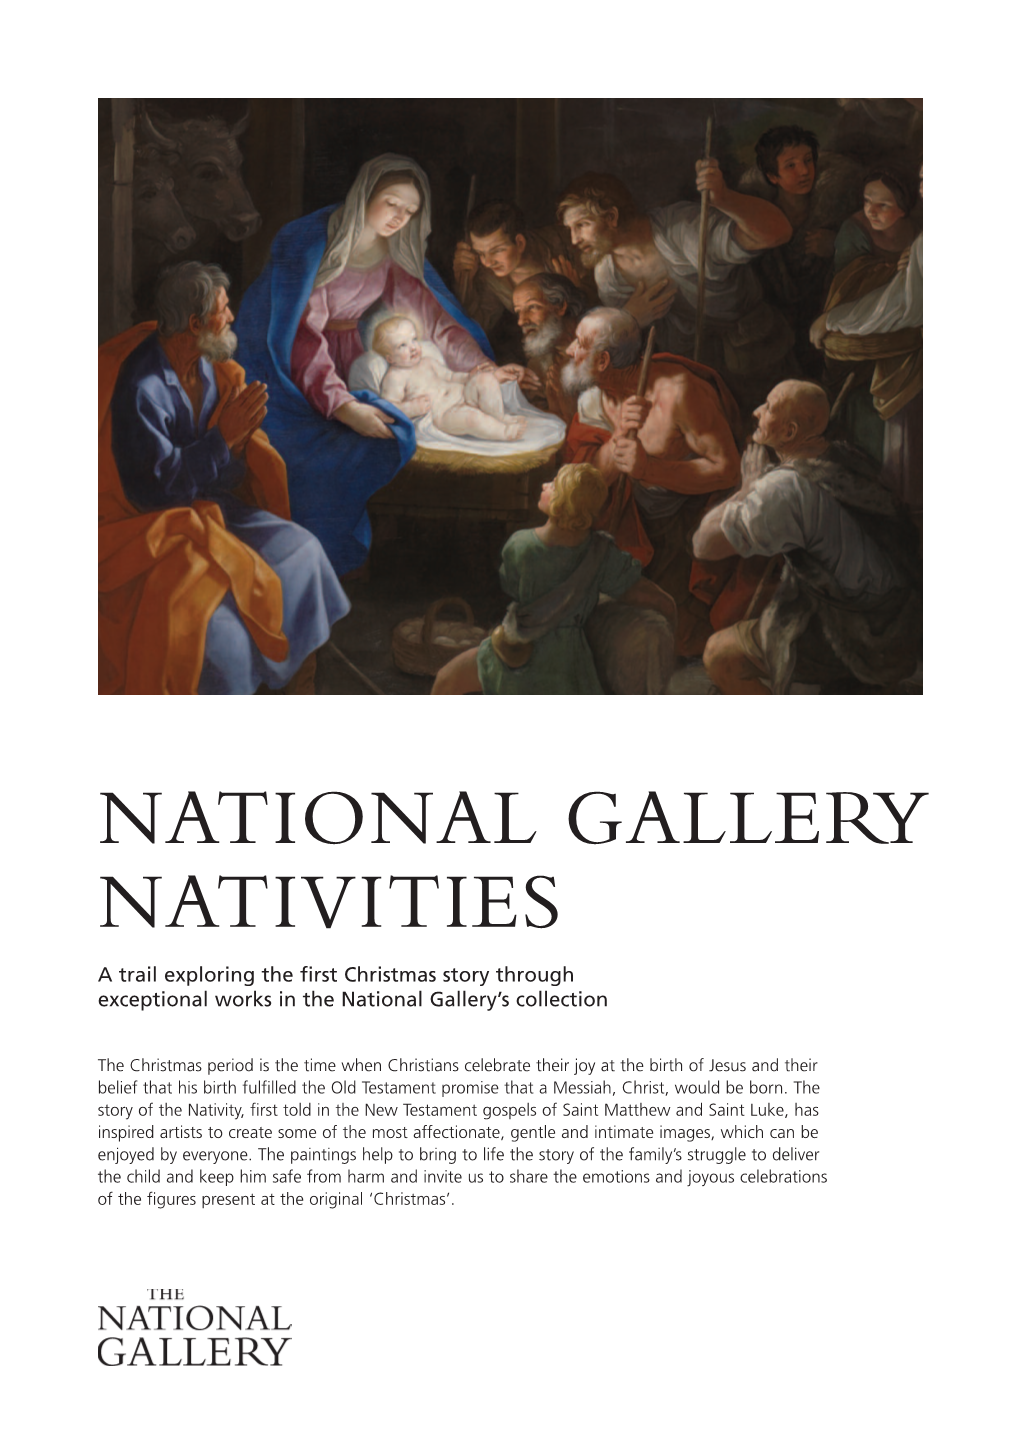 National Gallery Nativities, a Trail Exploring the First Christmas Story